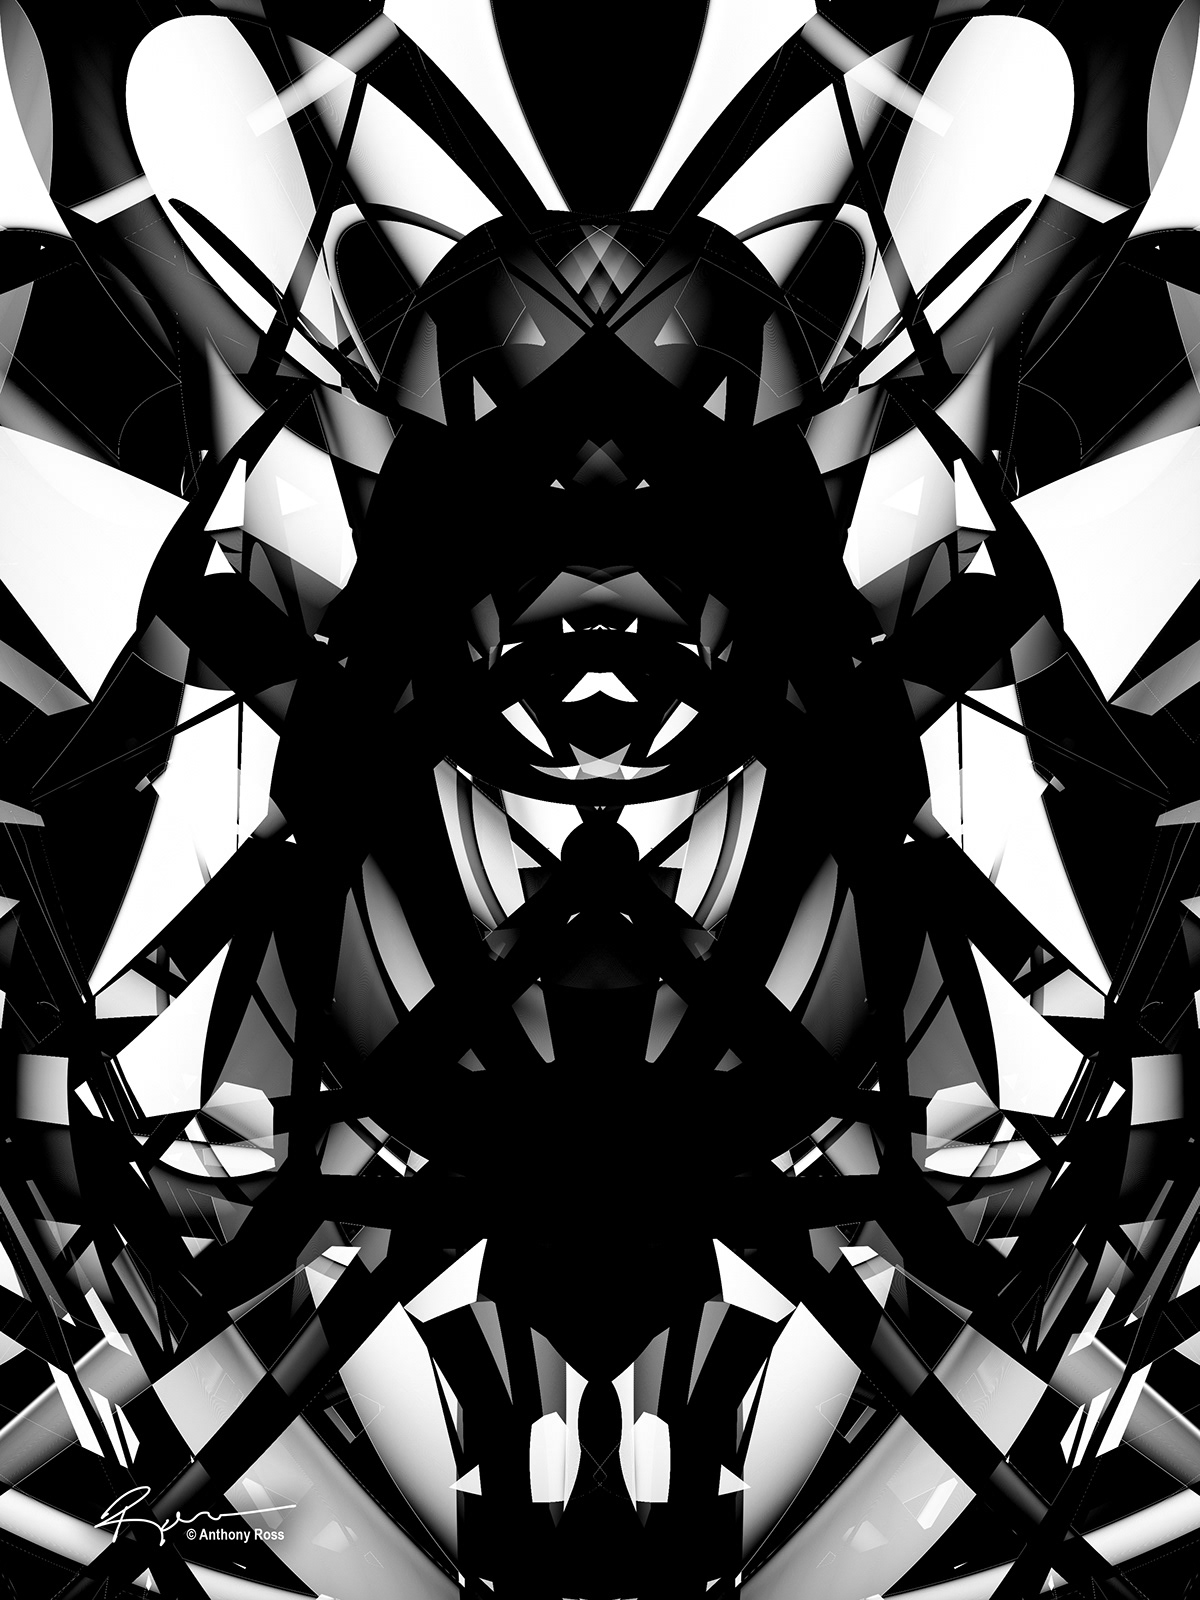 Rorschach test abstract art backdrop background backgrounds black black and white bright curve decoration design digital element geometric glow graphic harmony illustration light lotus pattern peace peaceful pure serenity shape texture tranquil tranquility twist visual wallpaper white zen